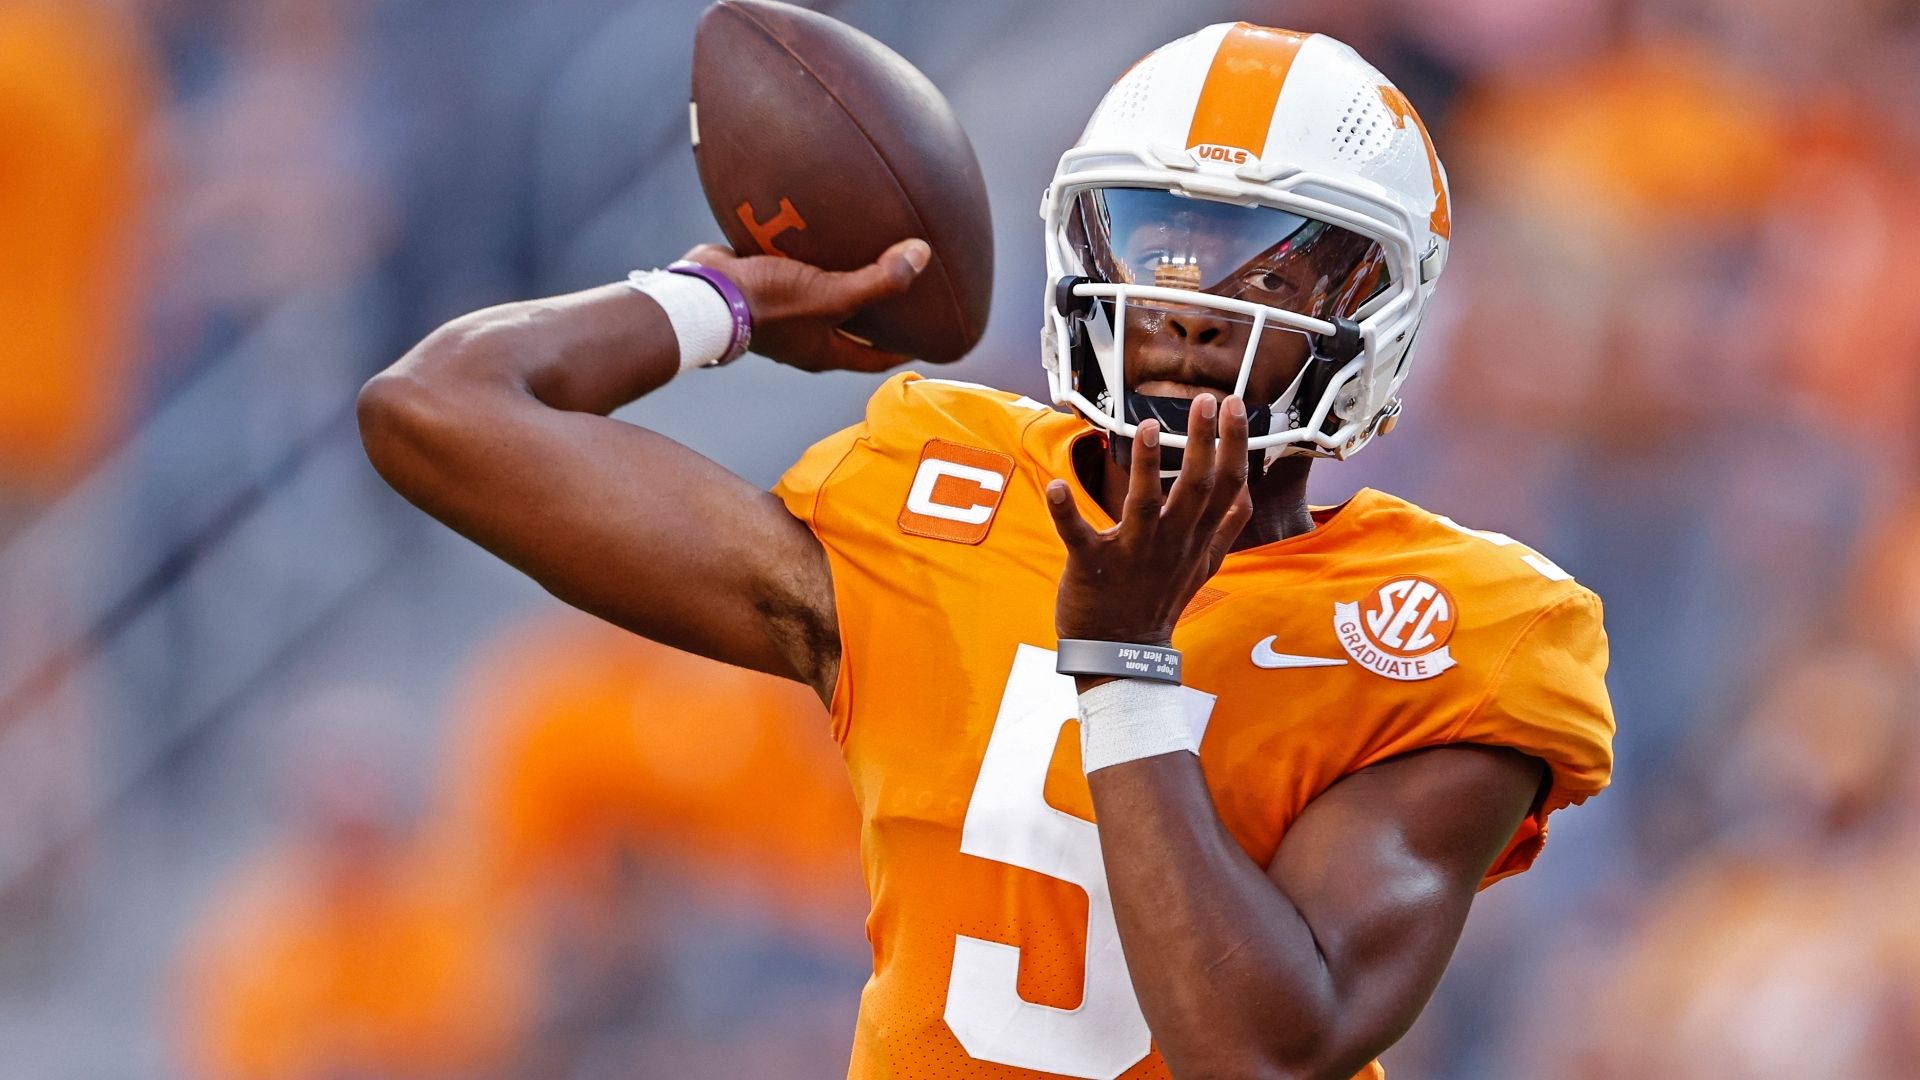 Hooker off the hook with 4 TDs in Tennessee opener